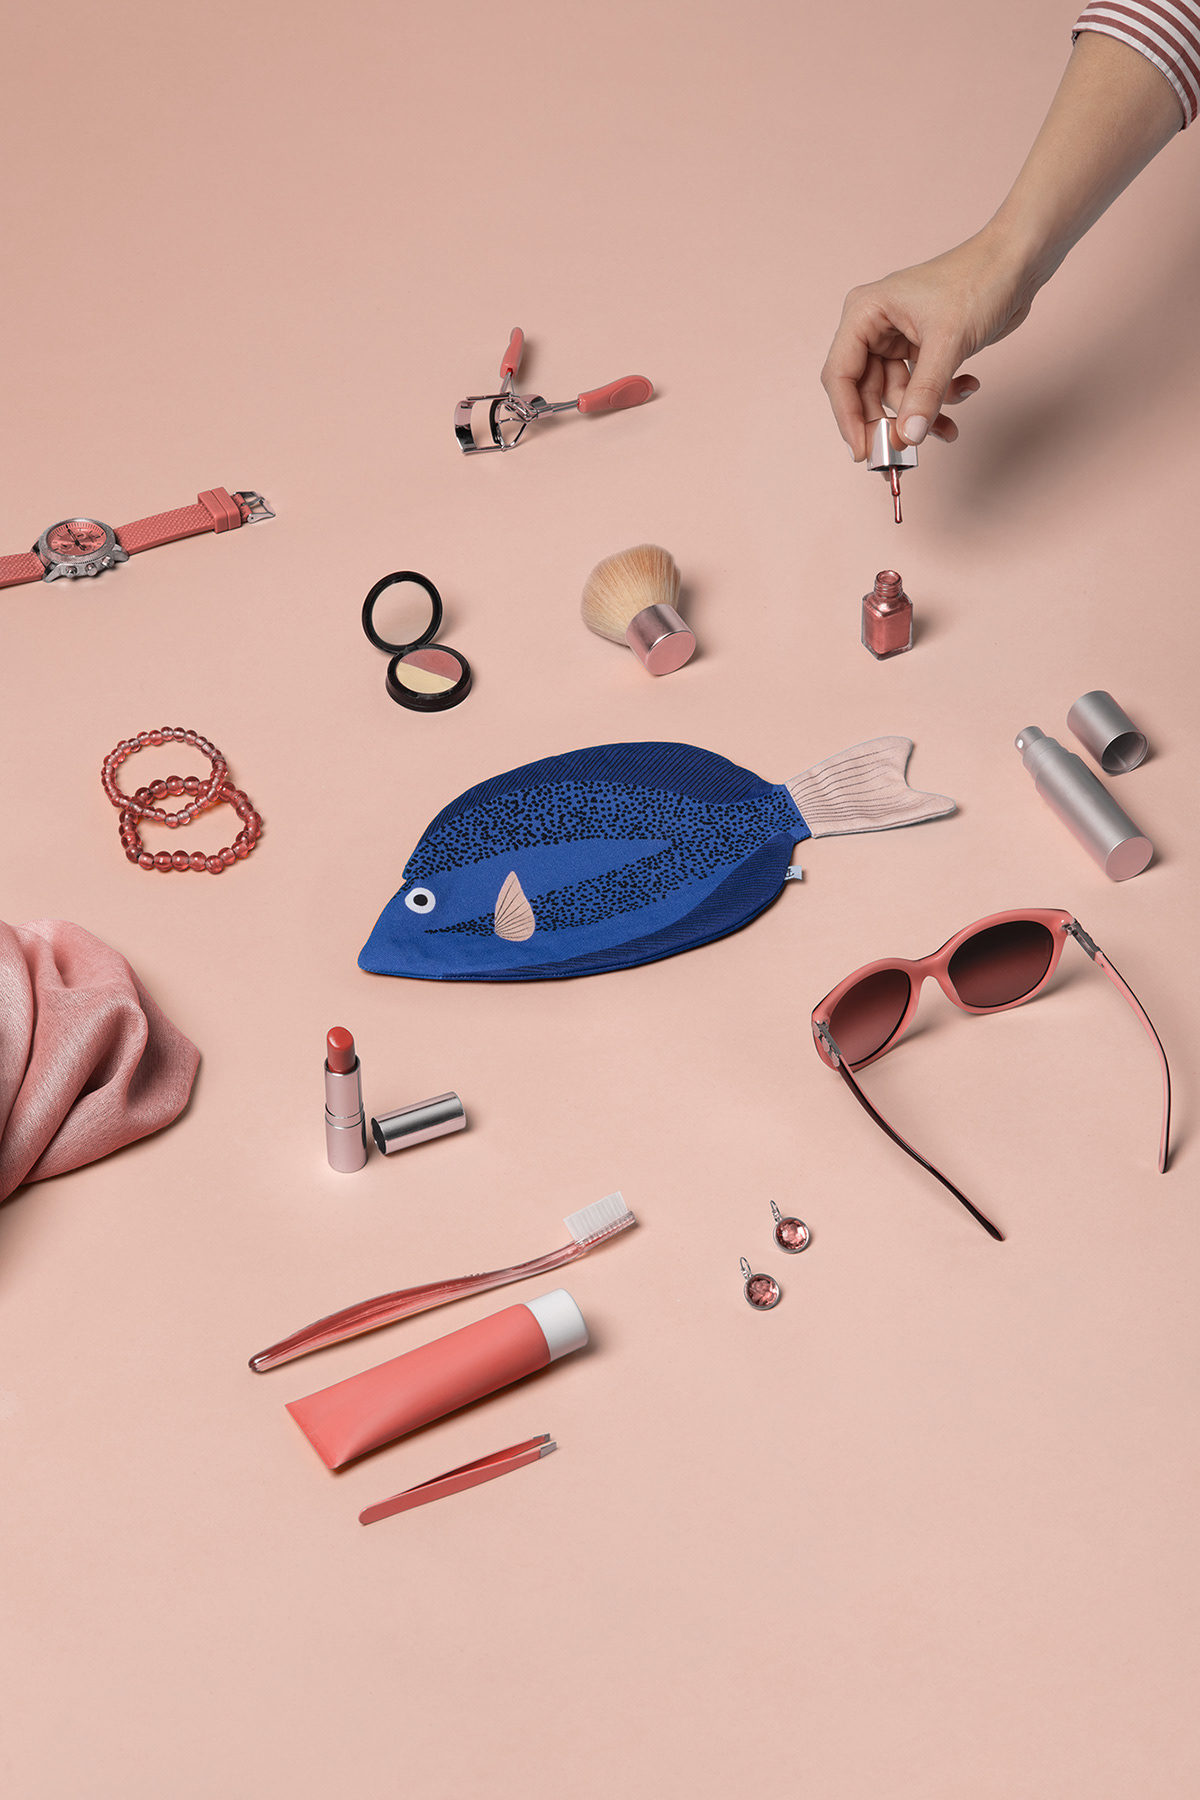 art direction  Photography  still life set design  retouch fish colors Fashion  don fisher products